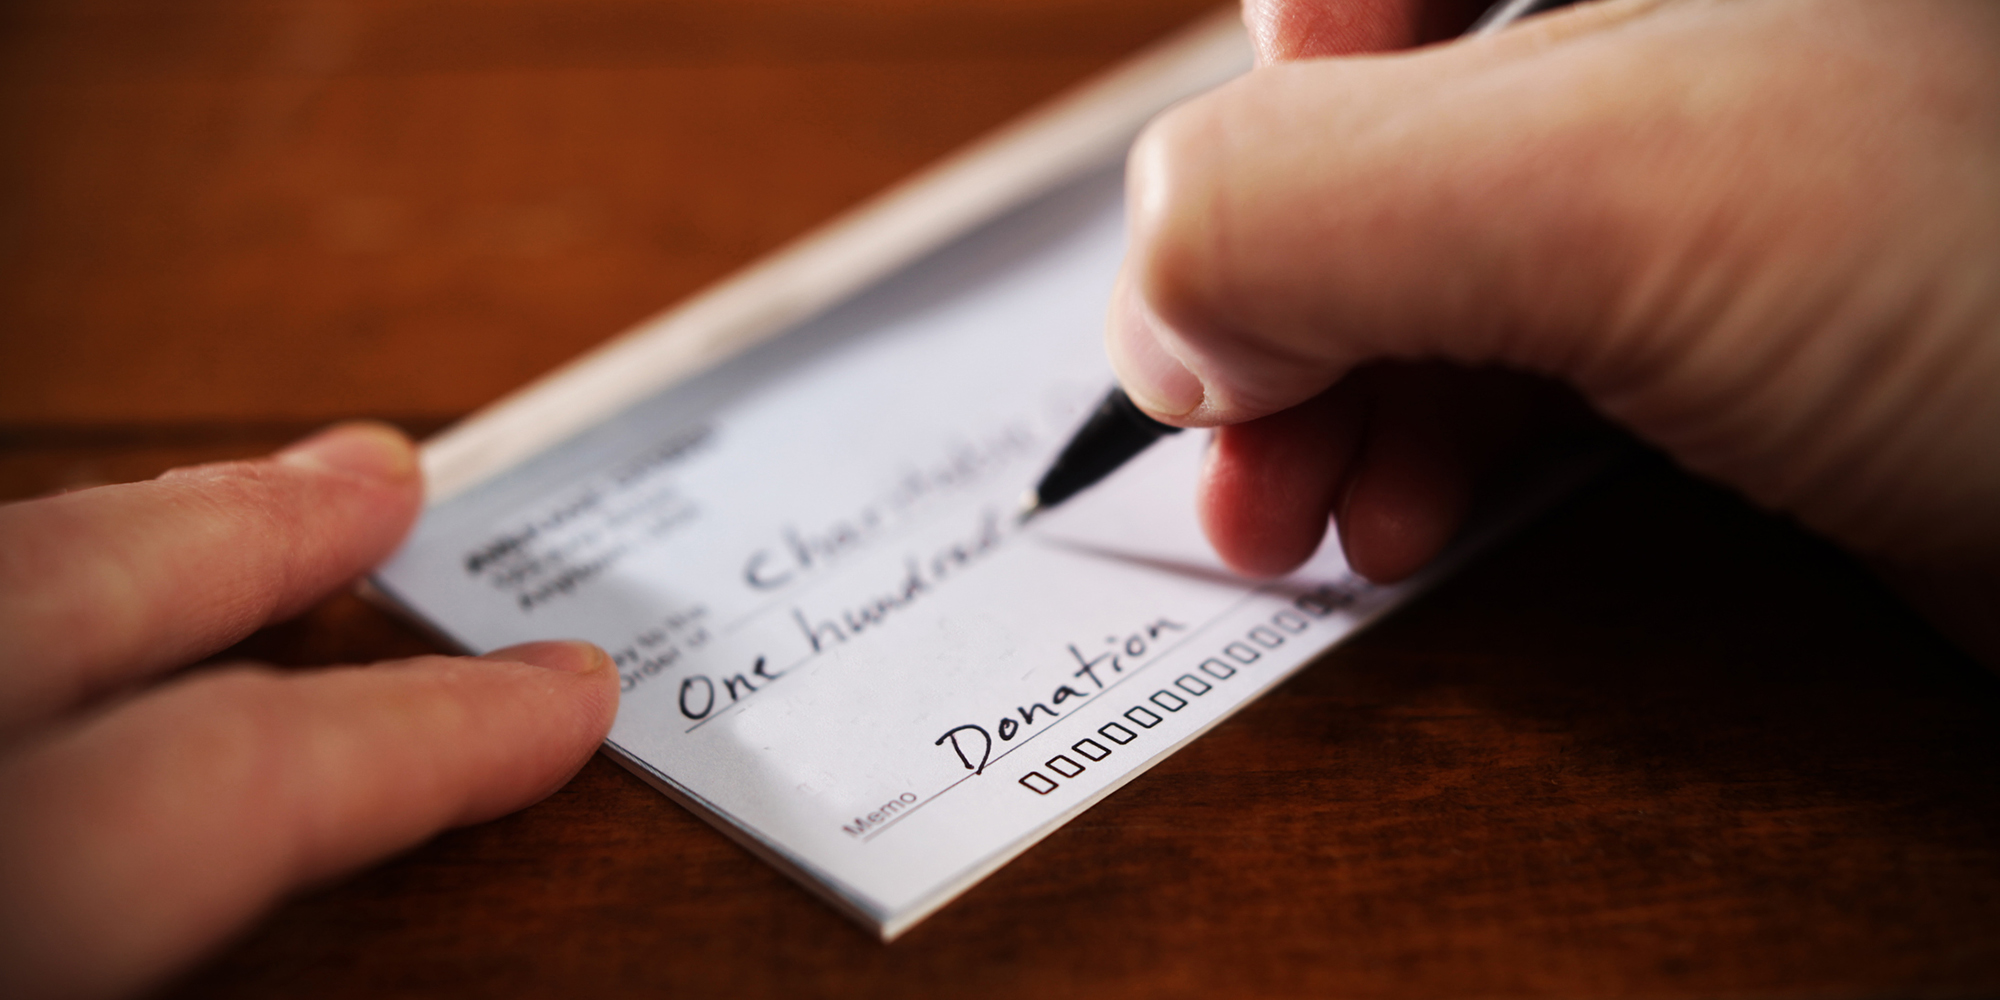 How to get the most tax benefit from your charitable